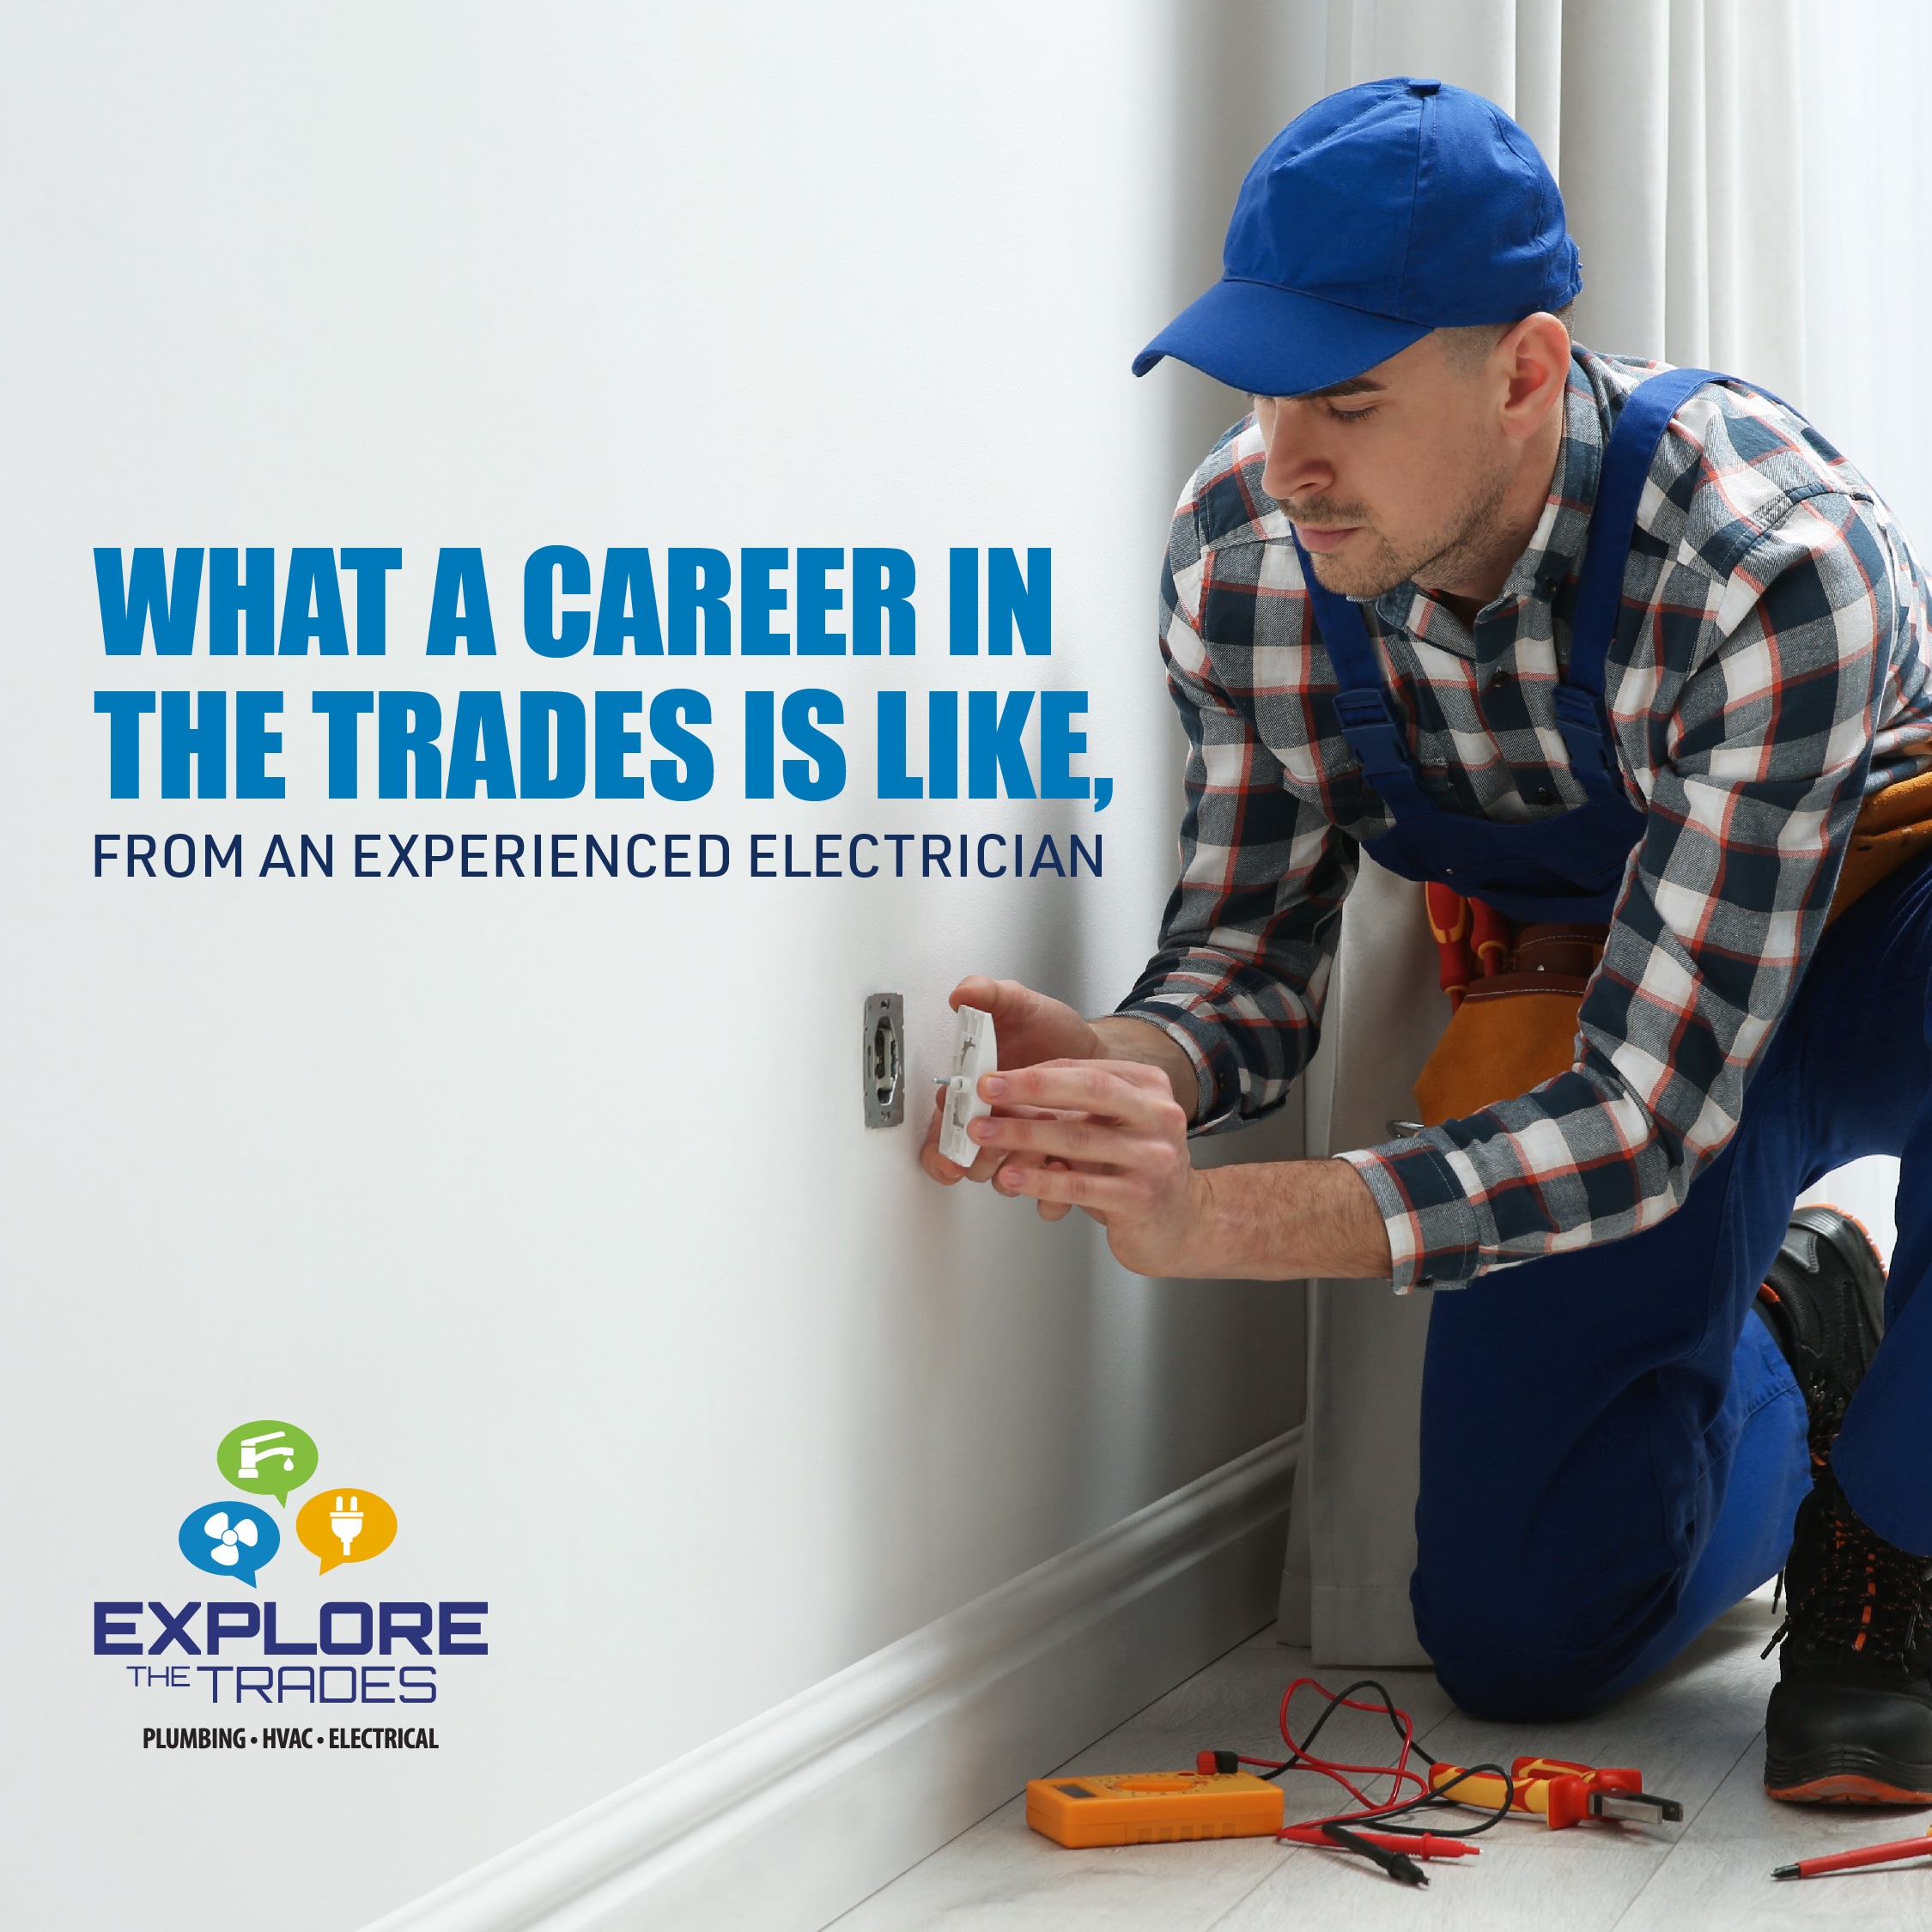 Trade School Experiences: What A Career in the Trades is Like, from an Experienced Electrician